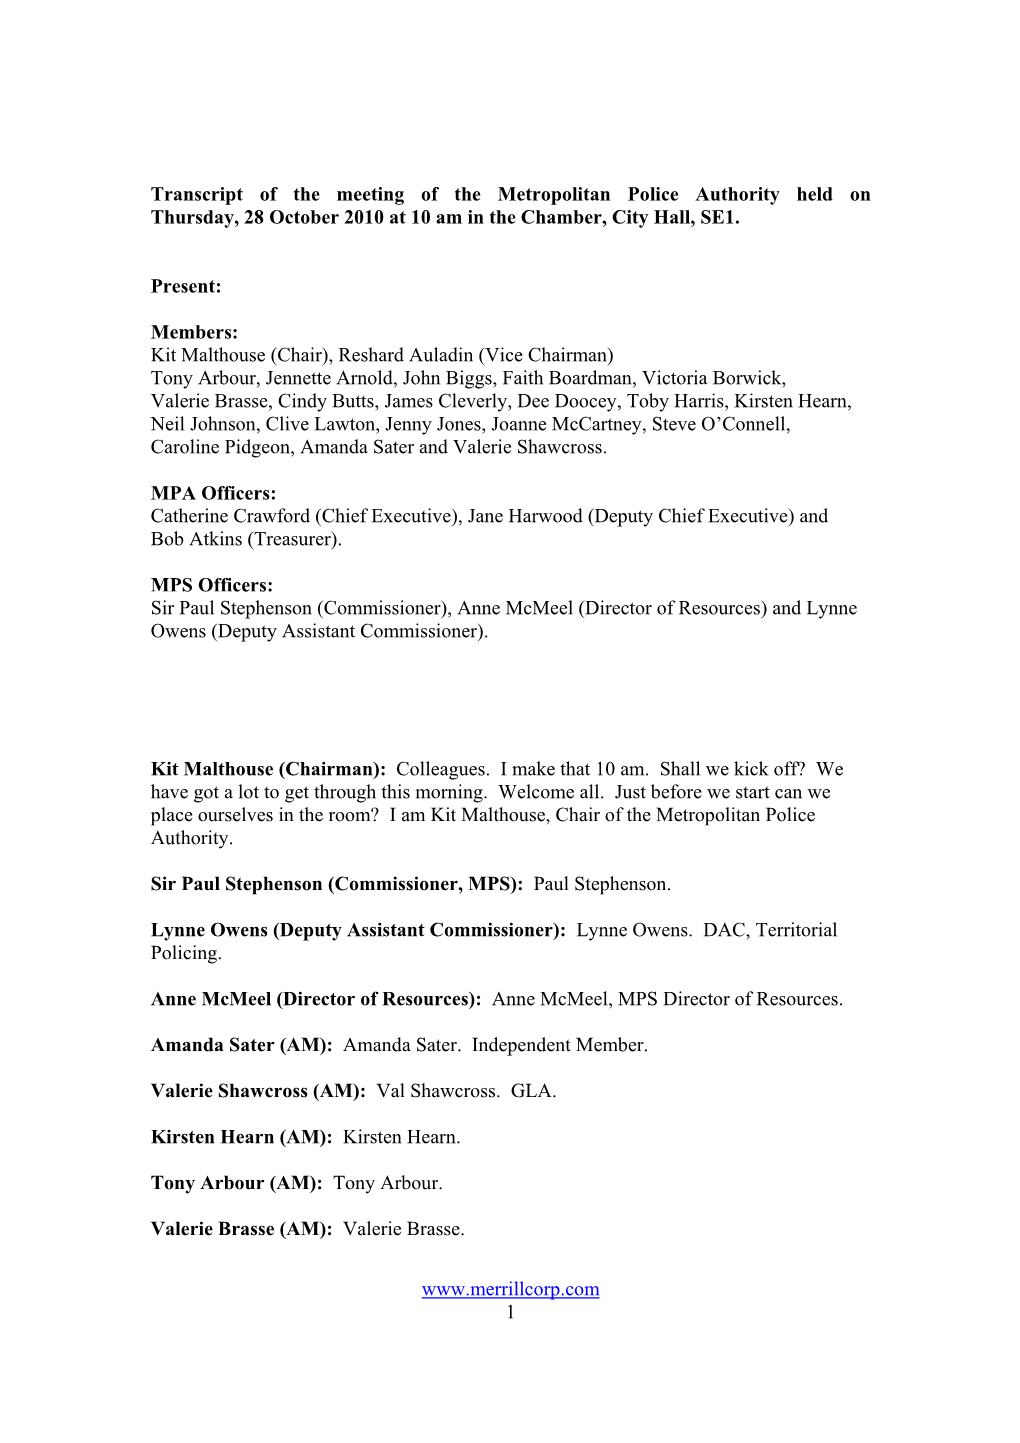 Transcript of the MPA Full Authority Meeting on 28 October 2010